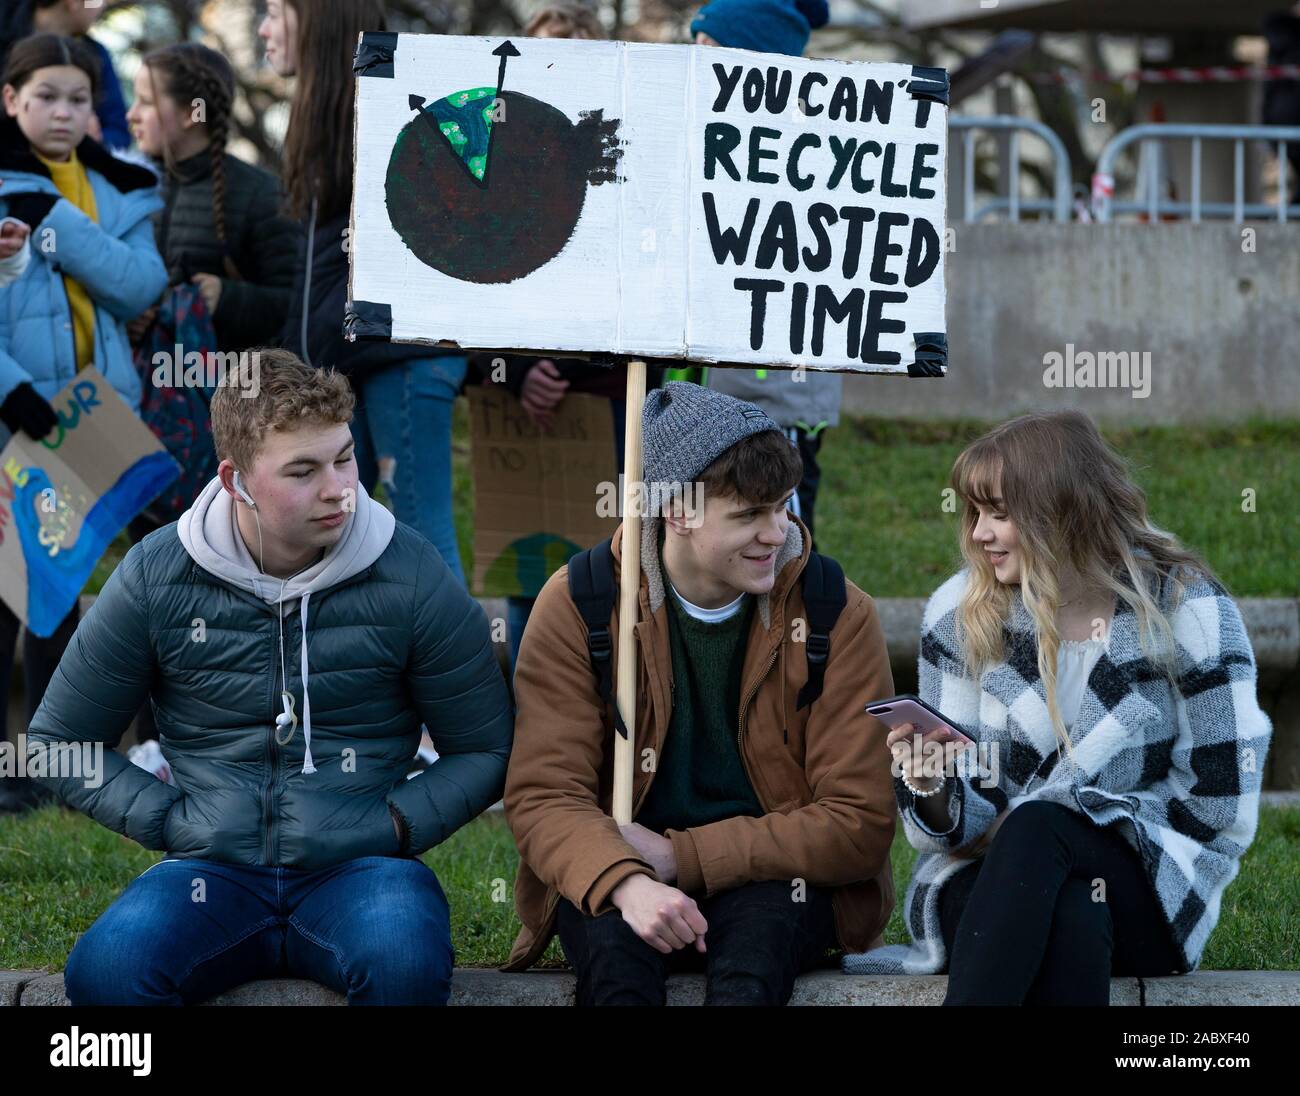 Edinburgh, Scotland, UK. 29th Nov, 2019. Young protestors gathered outside the Scottish Parliament building in Holyrood, Edinburgh to mark Global Climate Action Day. Similar protests occurred in many European cities. Credit: Iain Masterton/Alamy Live News Stock Photo